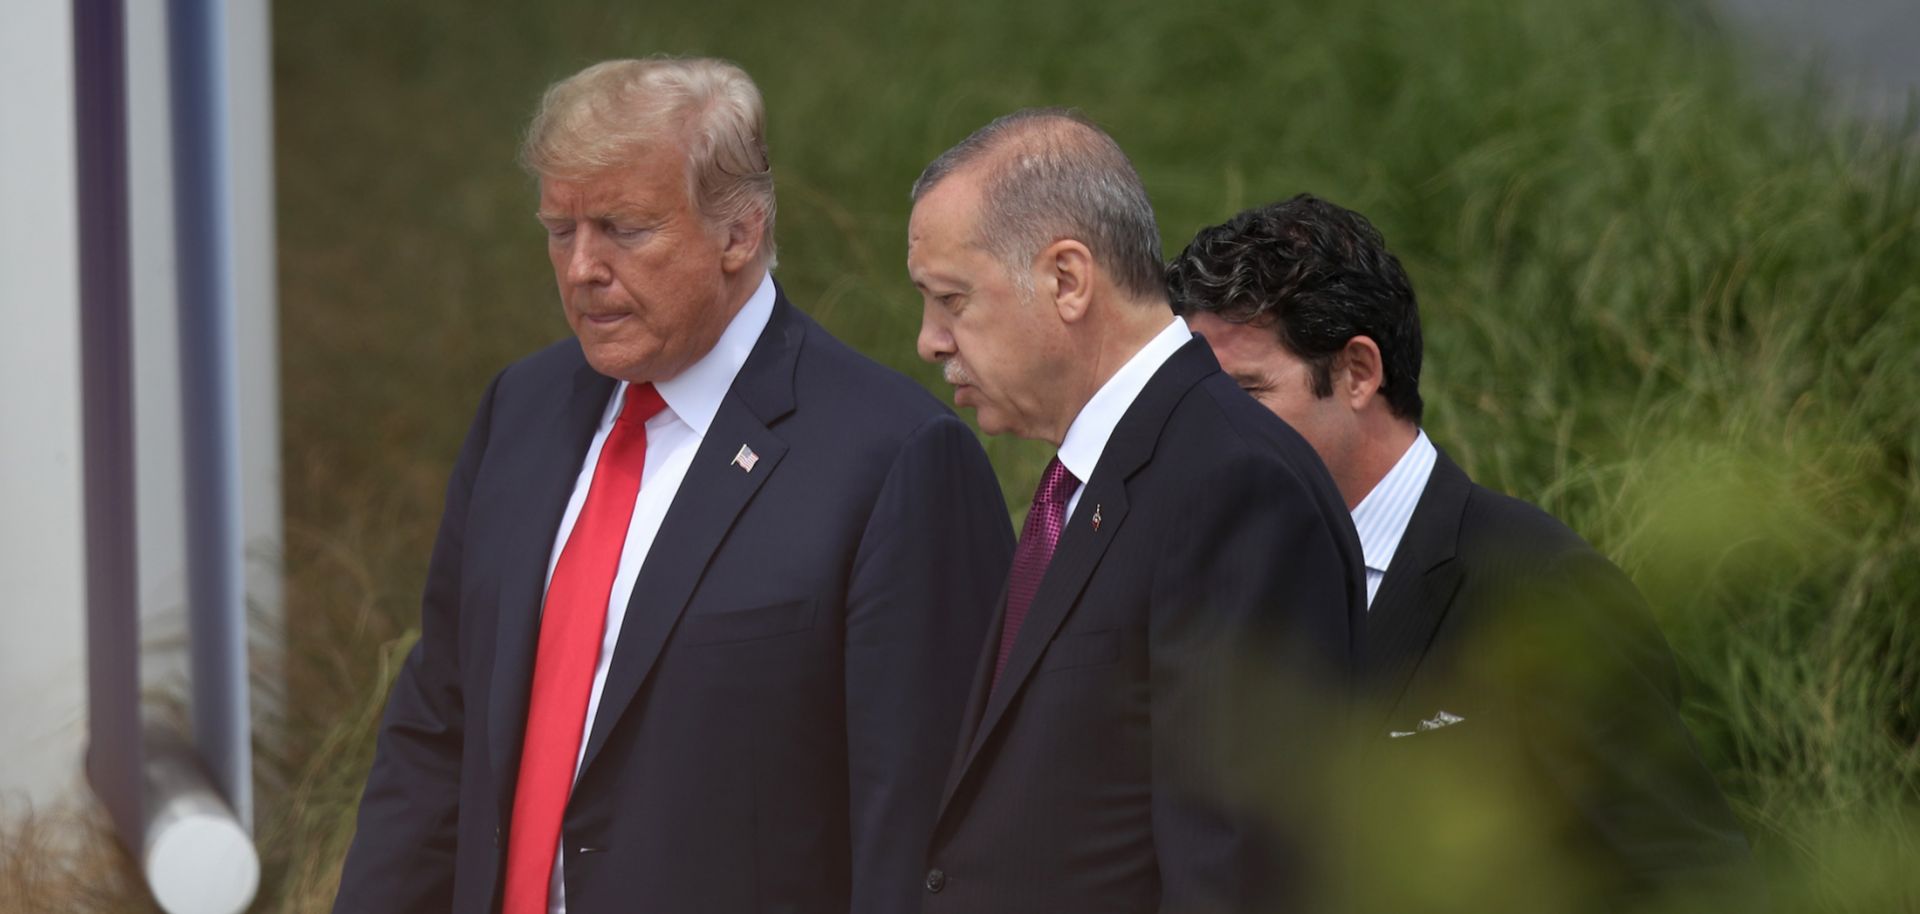 U.S. President Donald Trump and Turkish President Recep Tayyip Erdogan attend the opening ceremony at the 2018 NATO Summit at NATO headquarters on July 11, 2018, in Brussels.